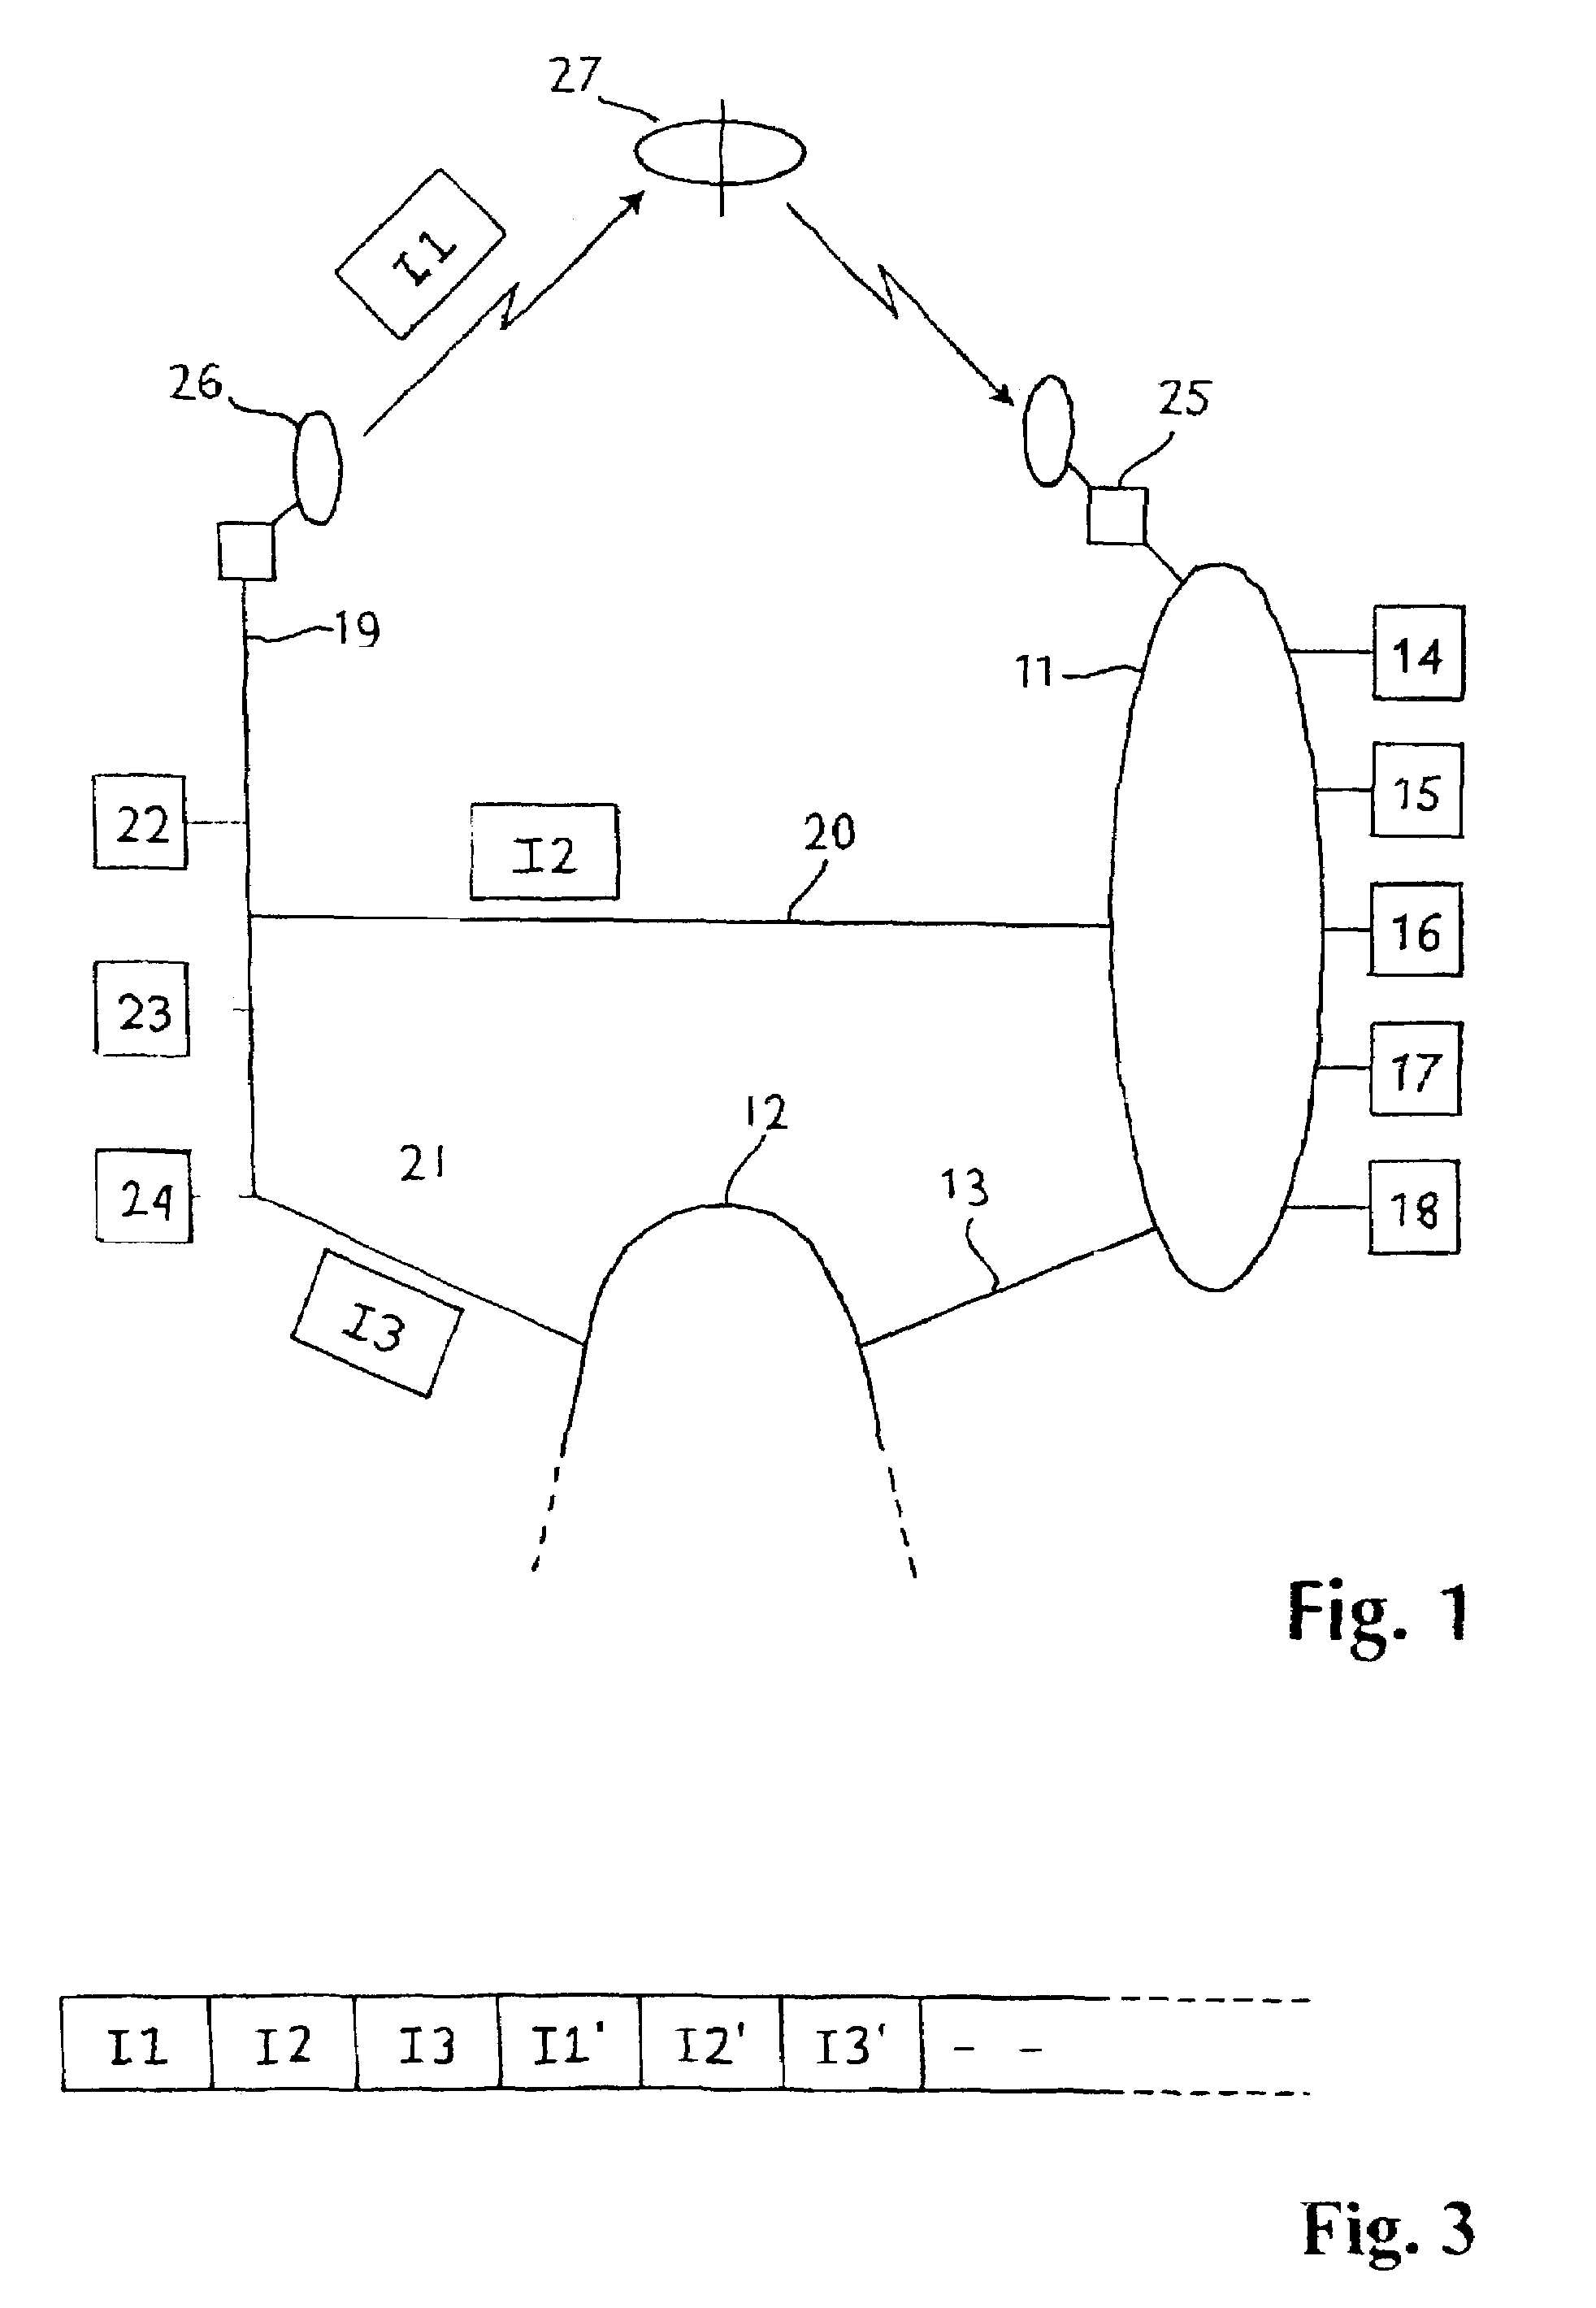 Method for ordering and transmitting of digital data amounts, particularly video signal